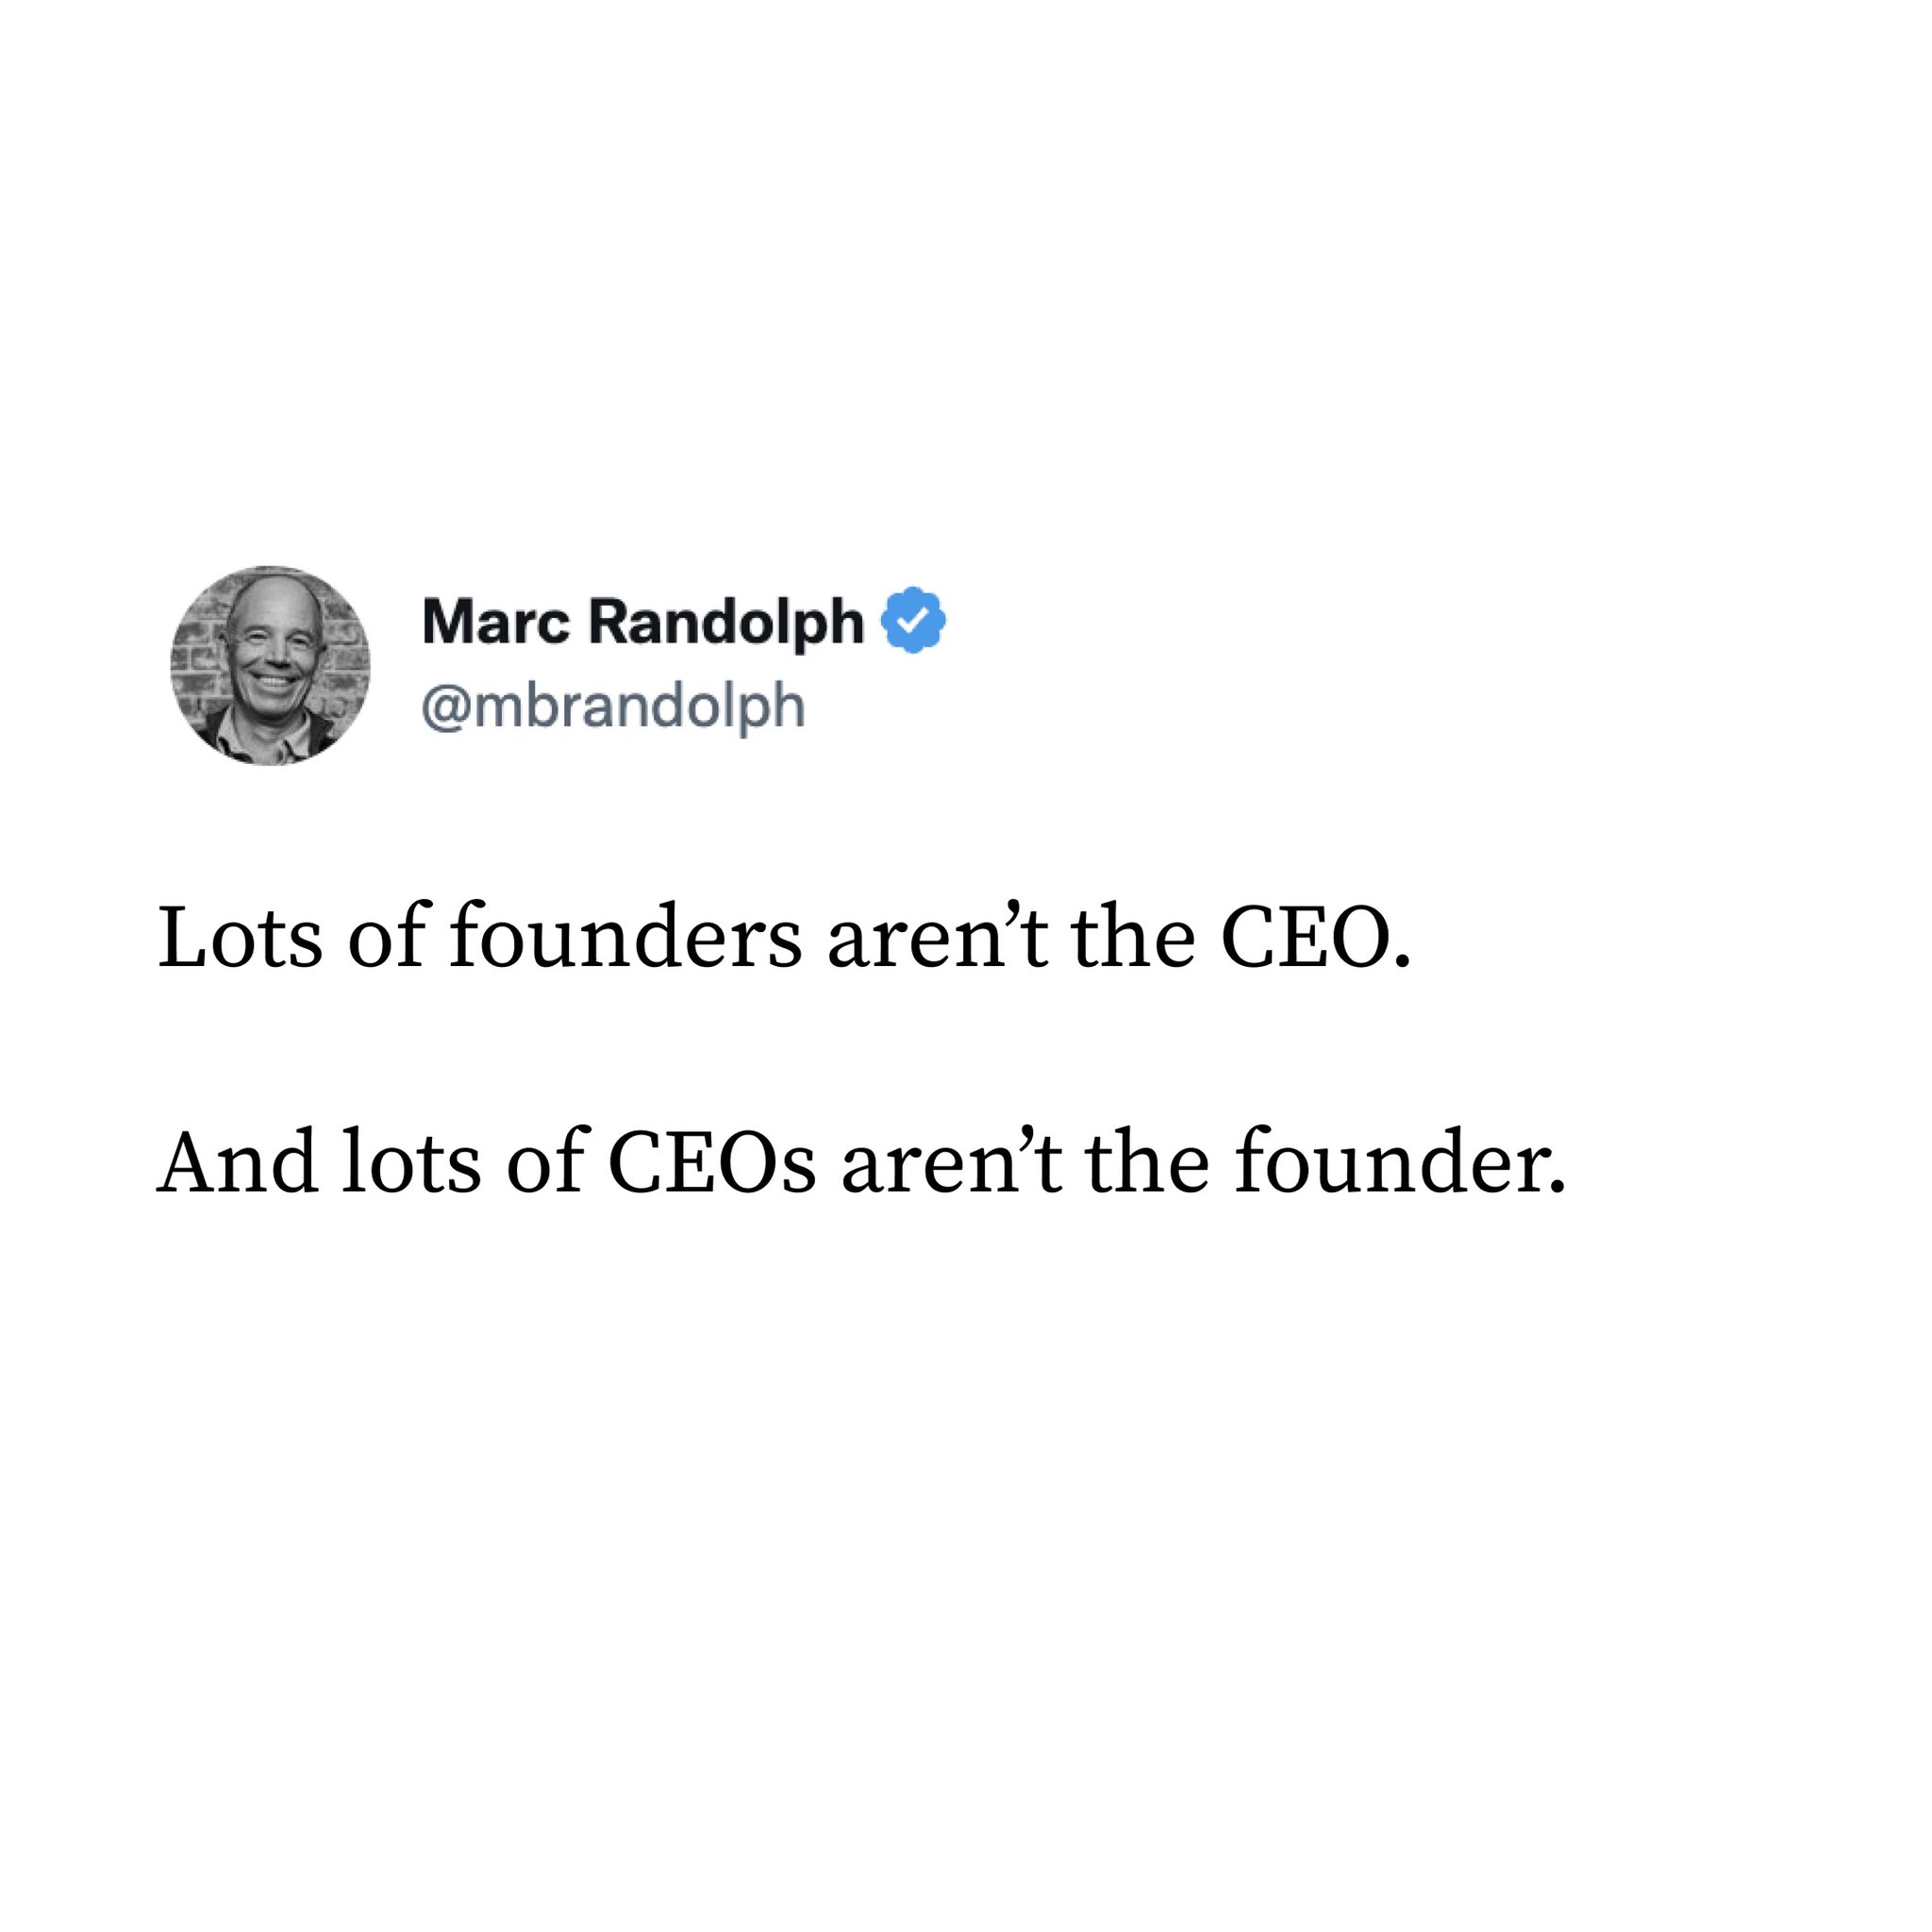 When did you know you wanted to be a CEO and not just a founder?